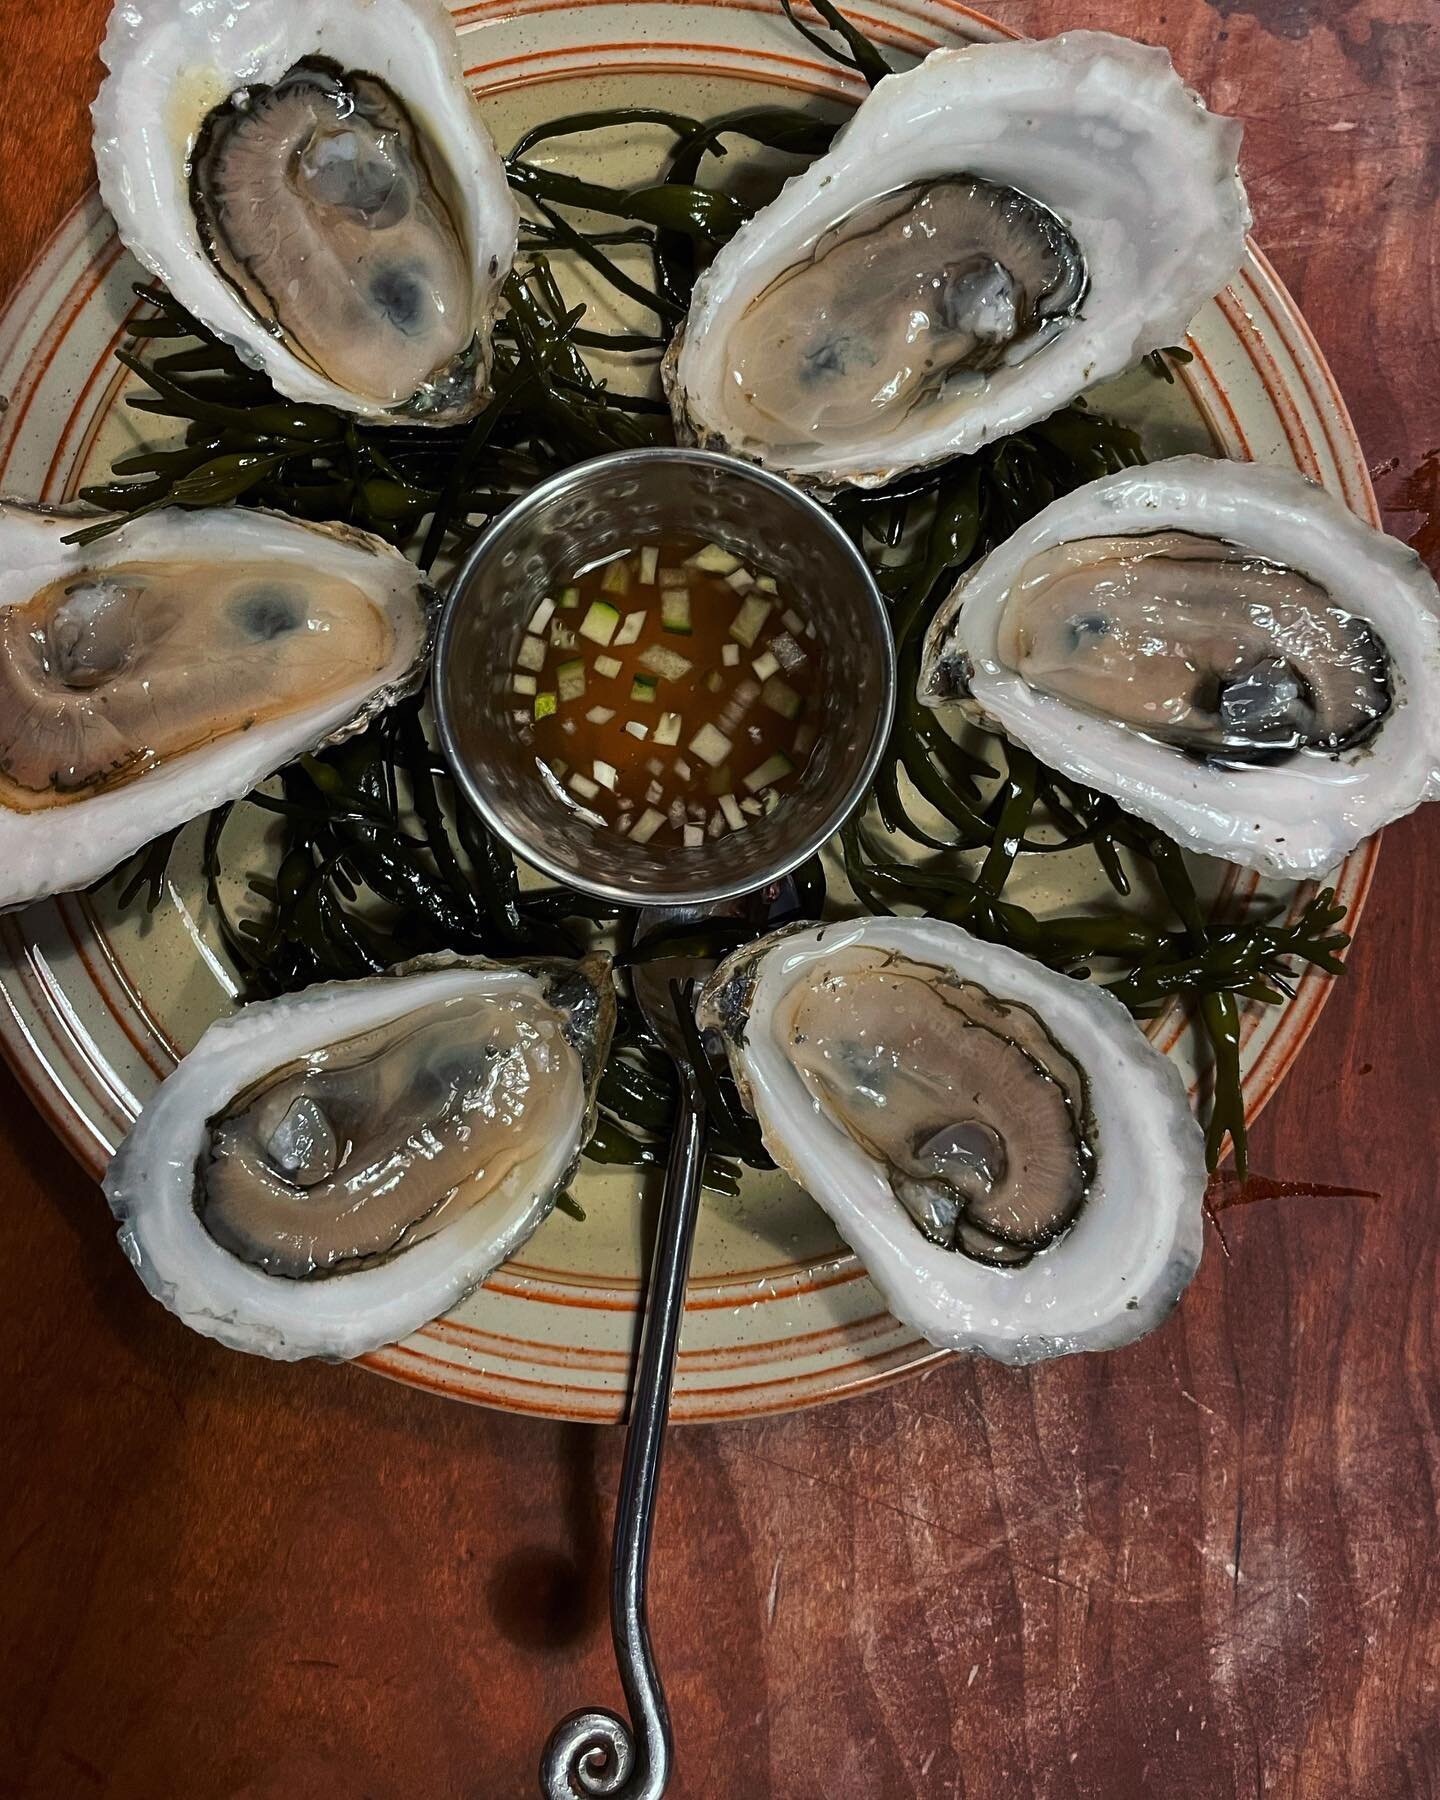 $2 OYSTERS start tomorrow evening folks. We open at 5! 
Reservation&rsquo;s recommended, link in bio. 
@gliddenpoint